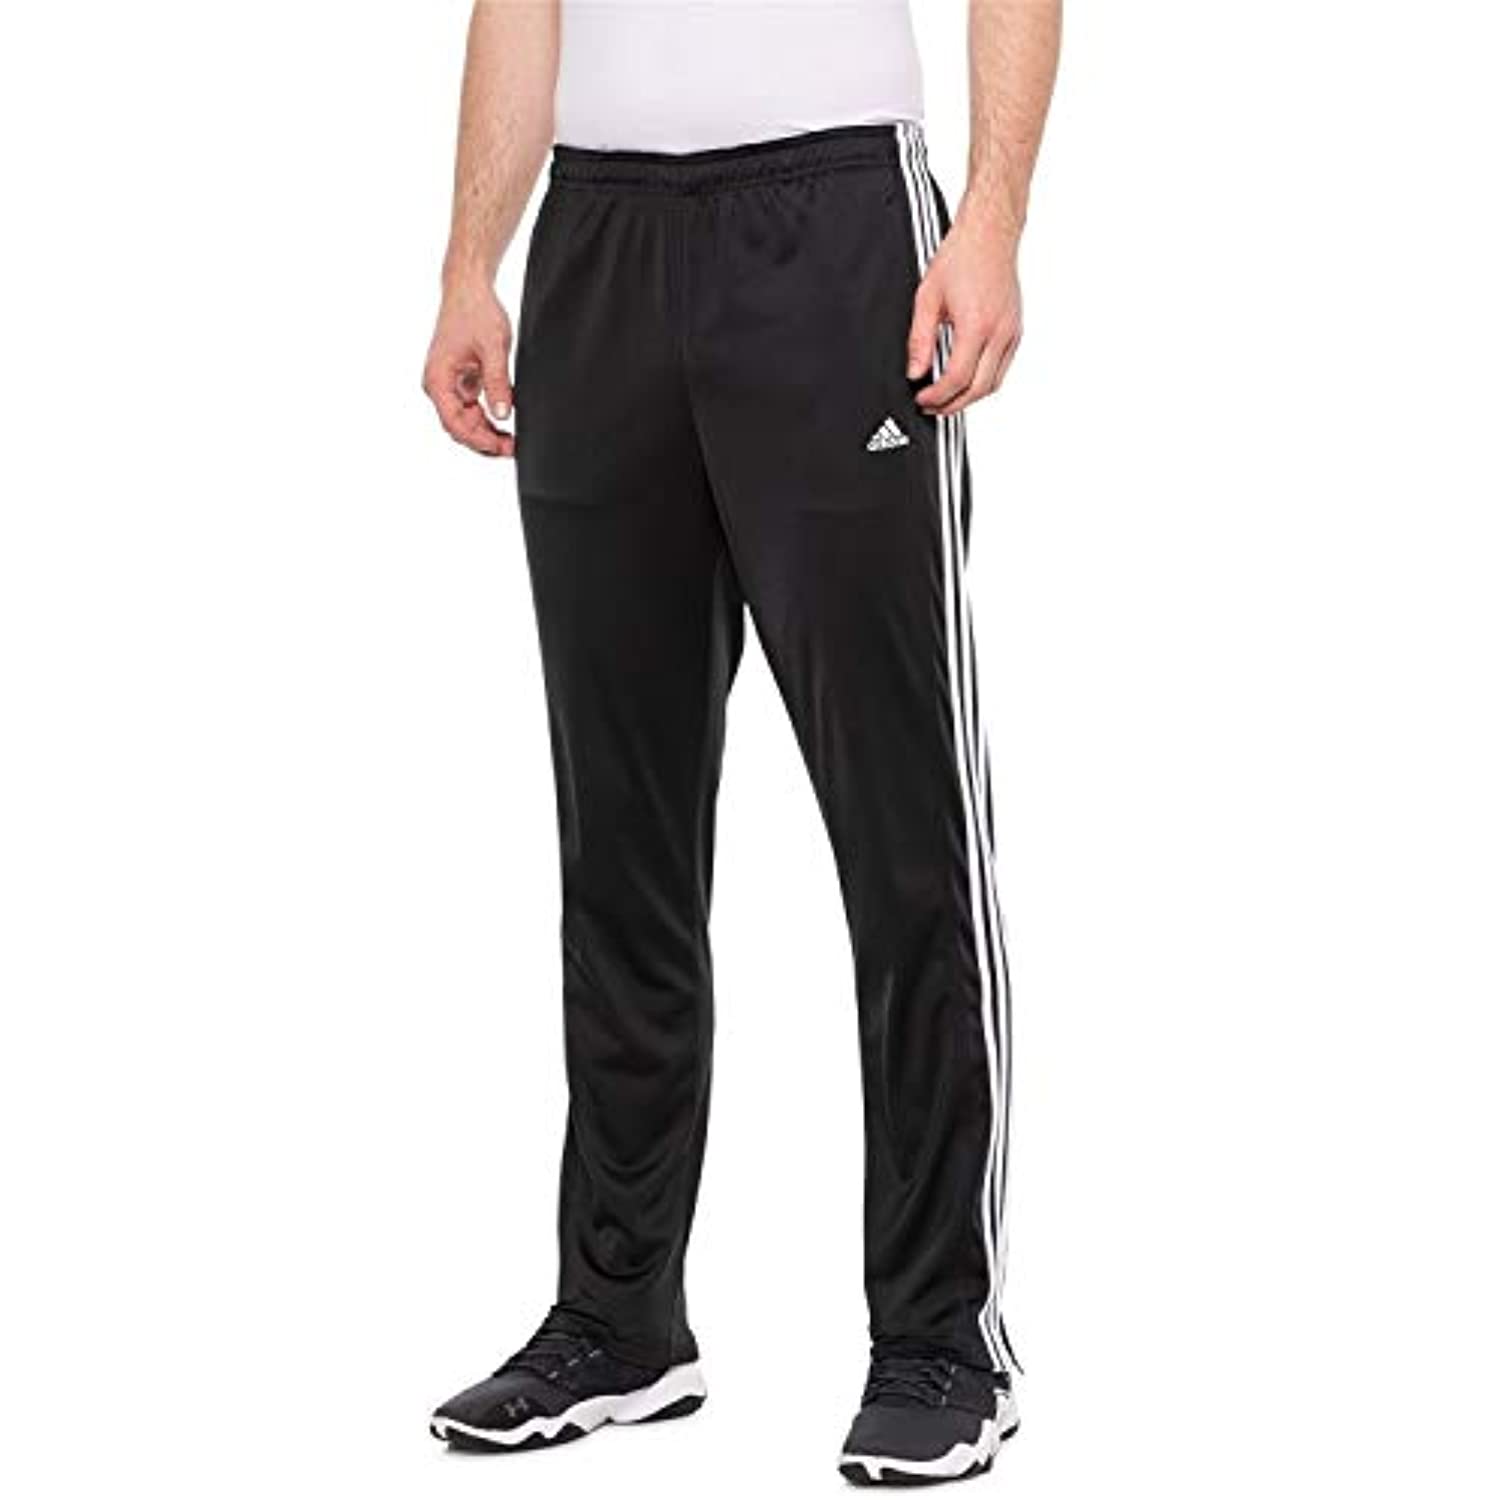 Adidas Men's Climalite Essentials Tricot 3 Stripe Tapered Leg Zip Pants  - Black (X-Large) - image 1 of 2